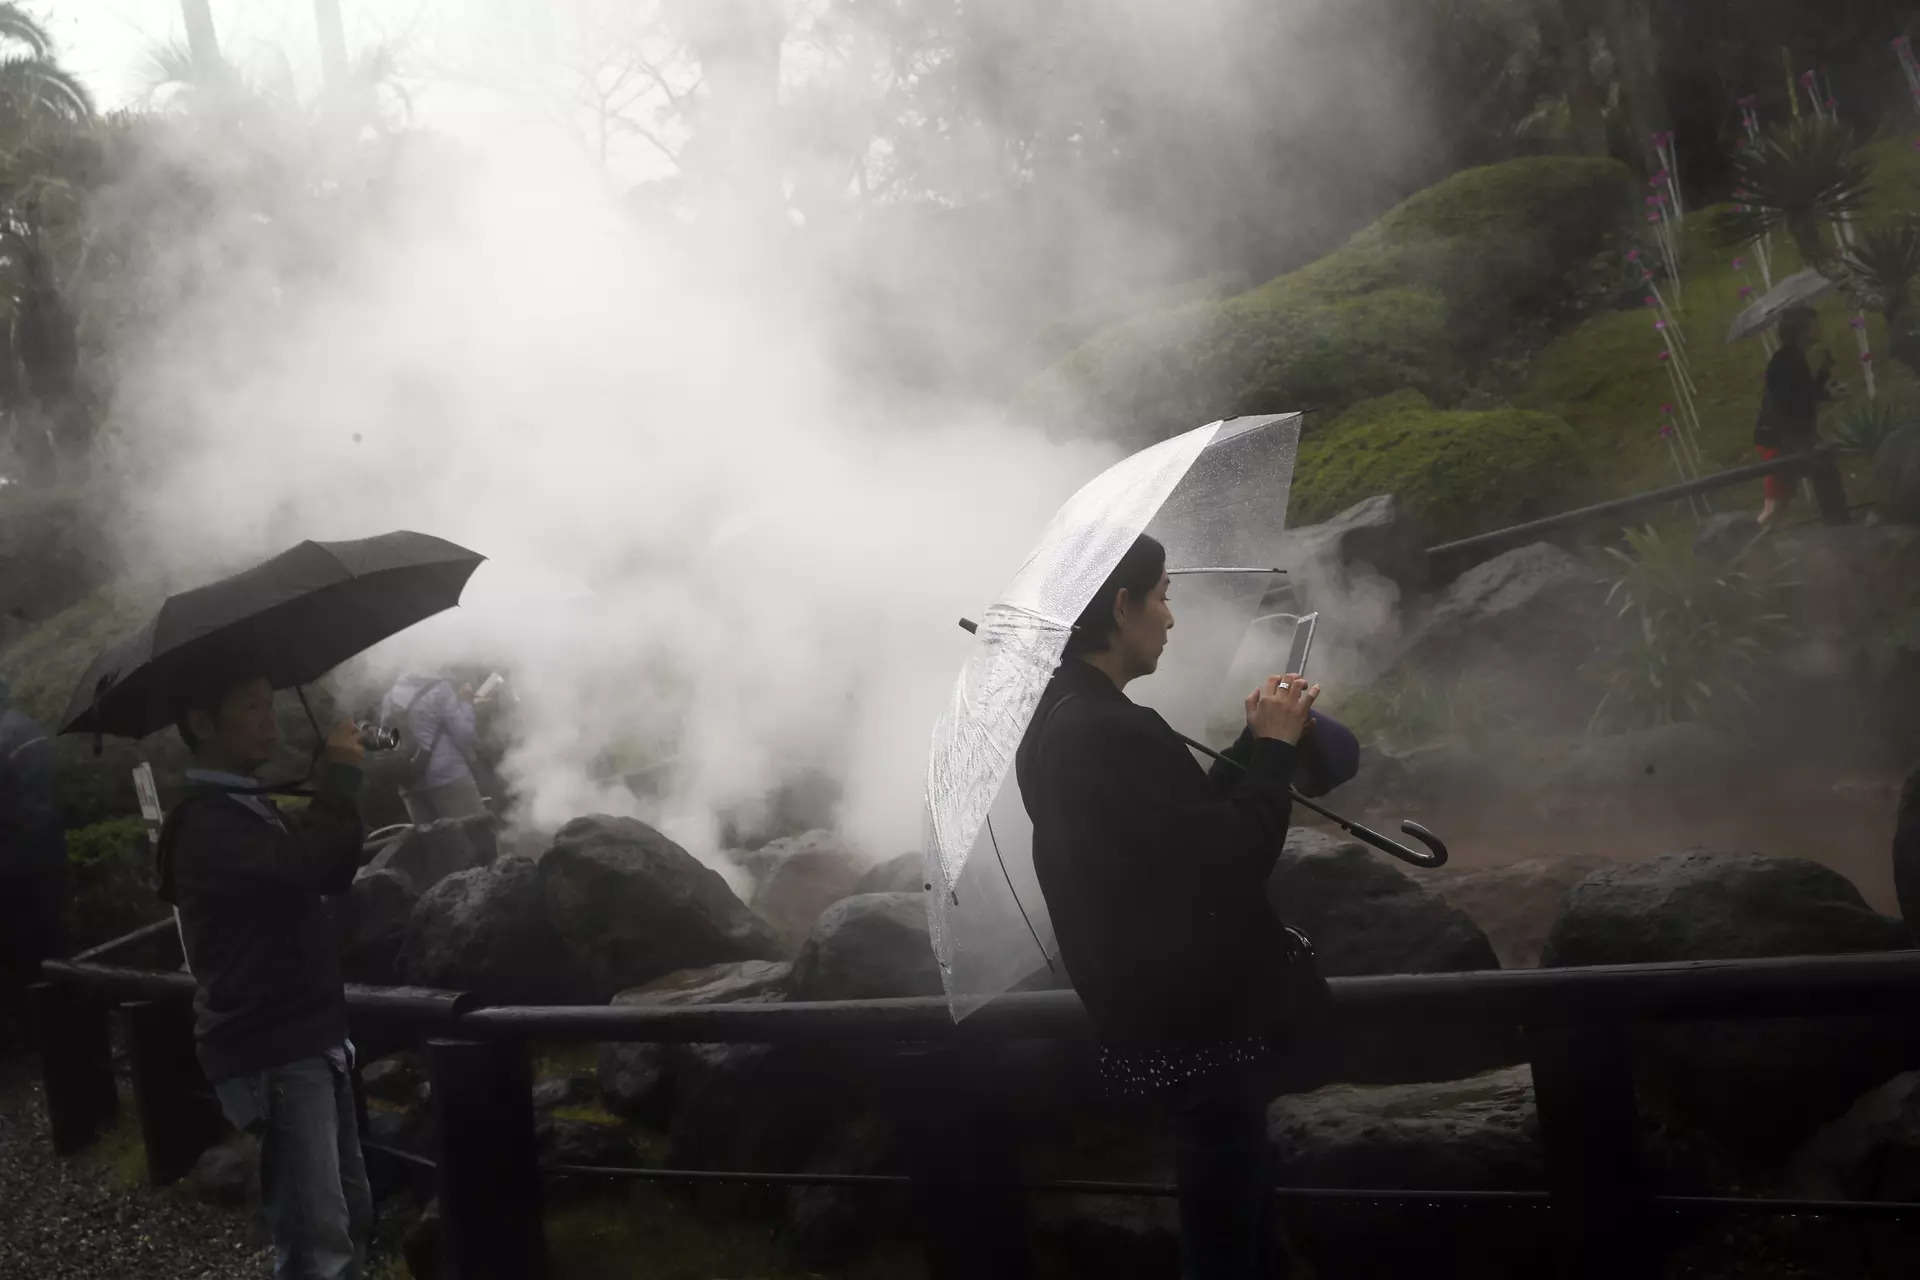 <p>FILE - Visitors take photos as they visit the hot springs in Beppu, Japan Oct. 17, 2019. Japan and the United States agreed Saturday, April 15, 2023 to cooperate on developing geothermal energy, one of the most plentiful resources on this volcanic island chain. (AP Photo/Christophe Ena, File)</p>